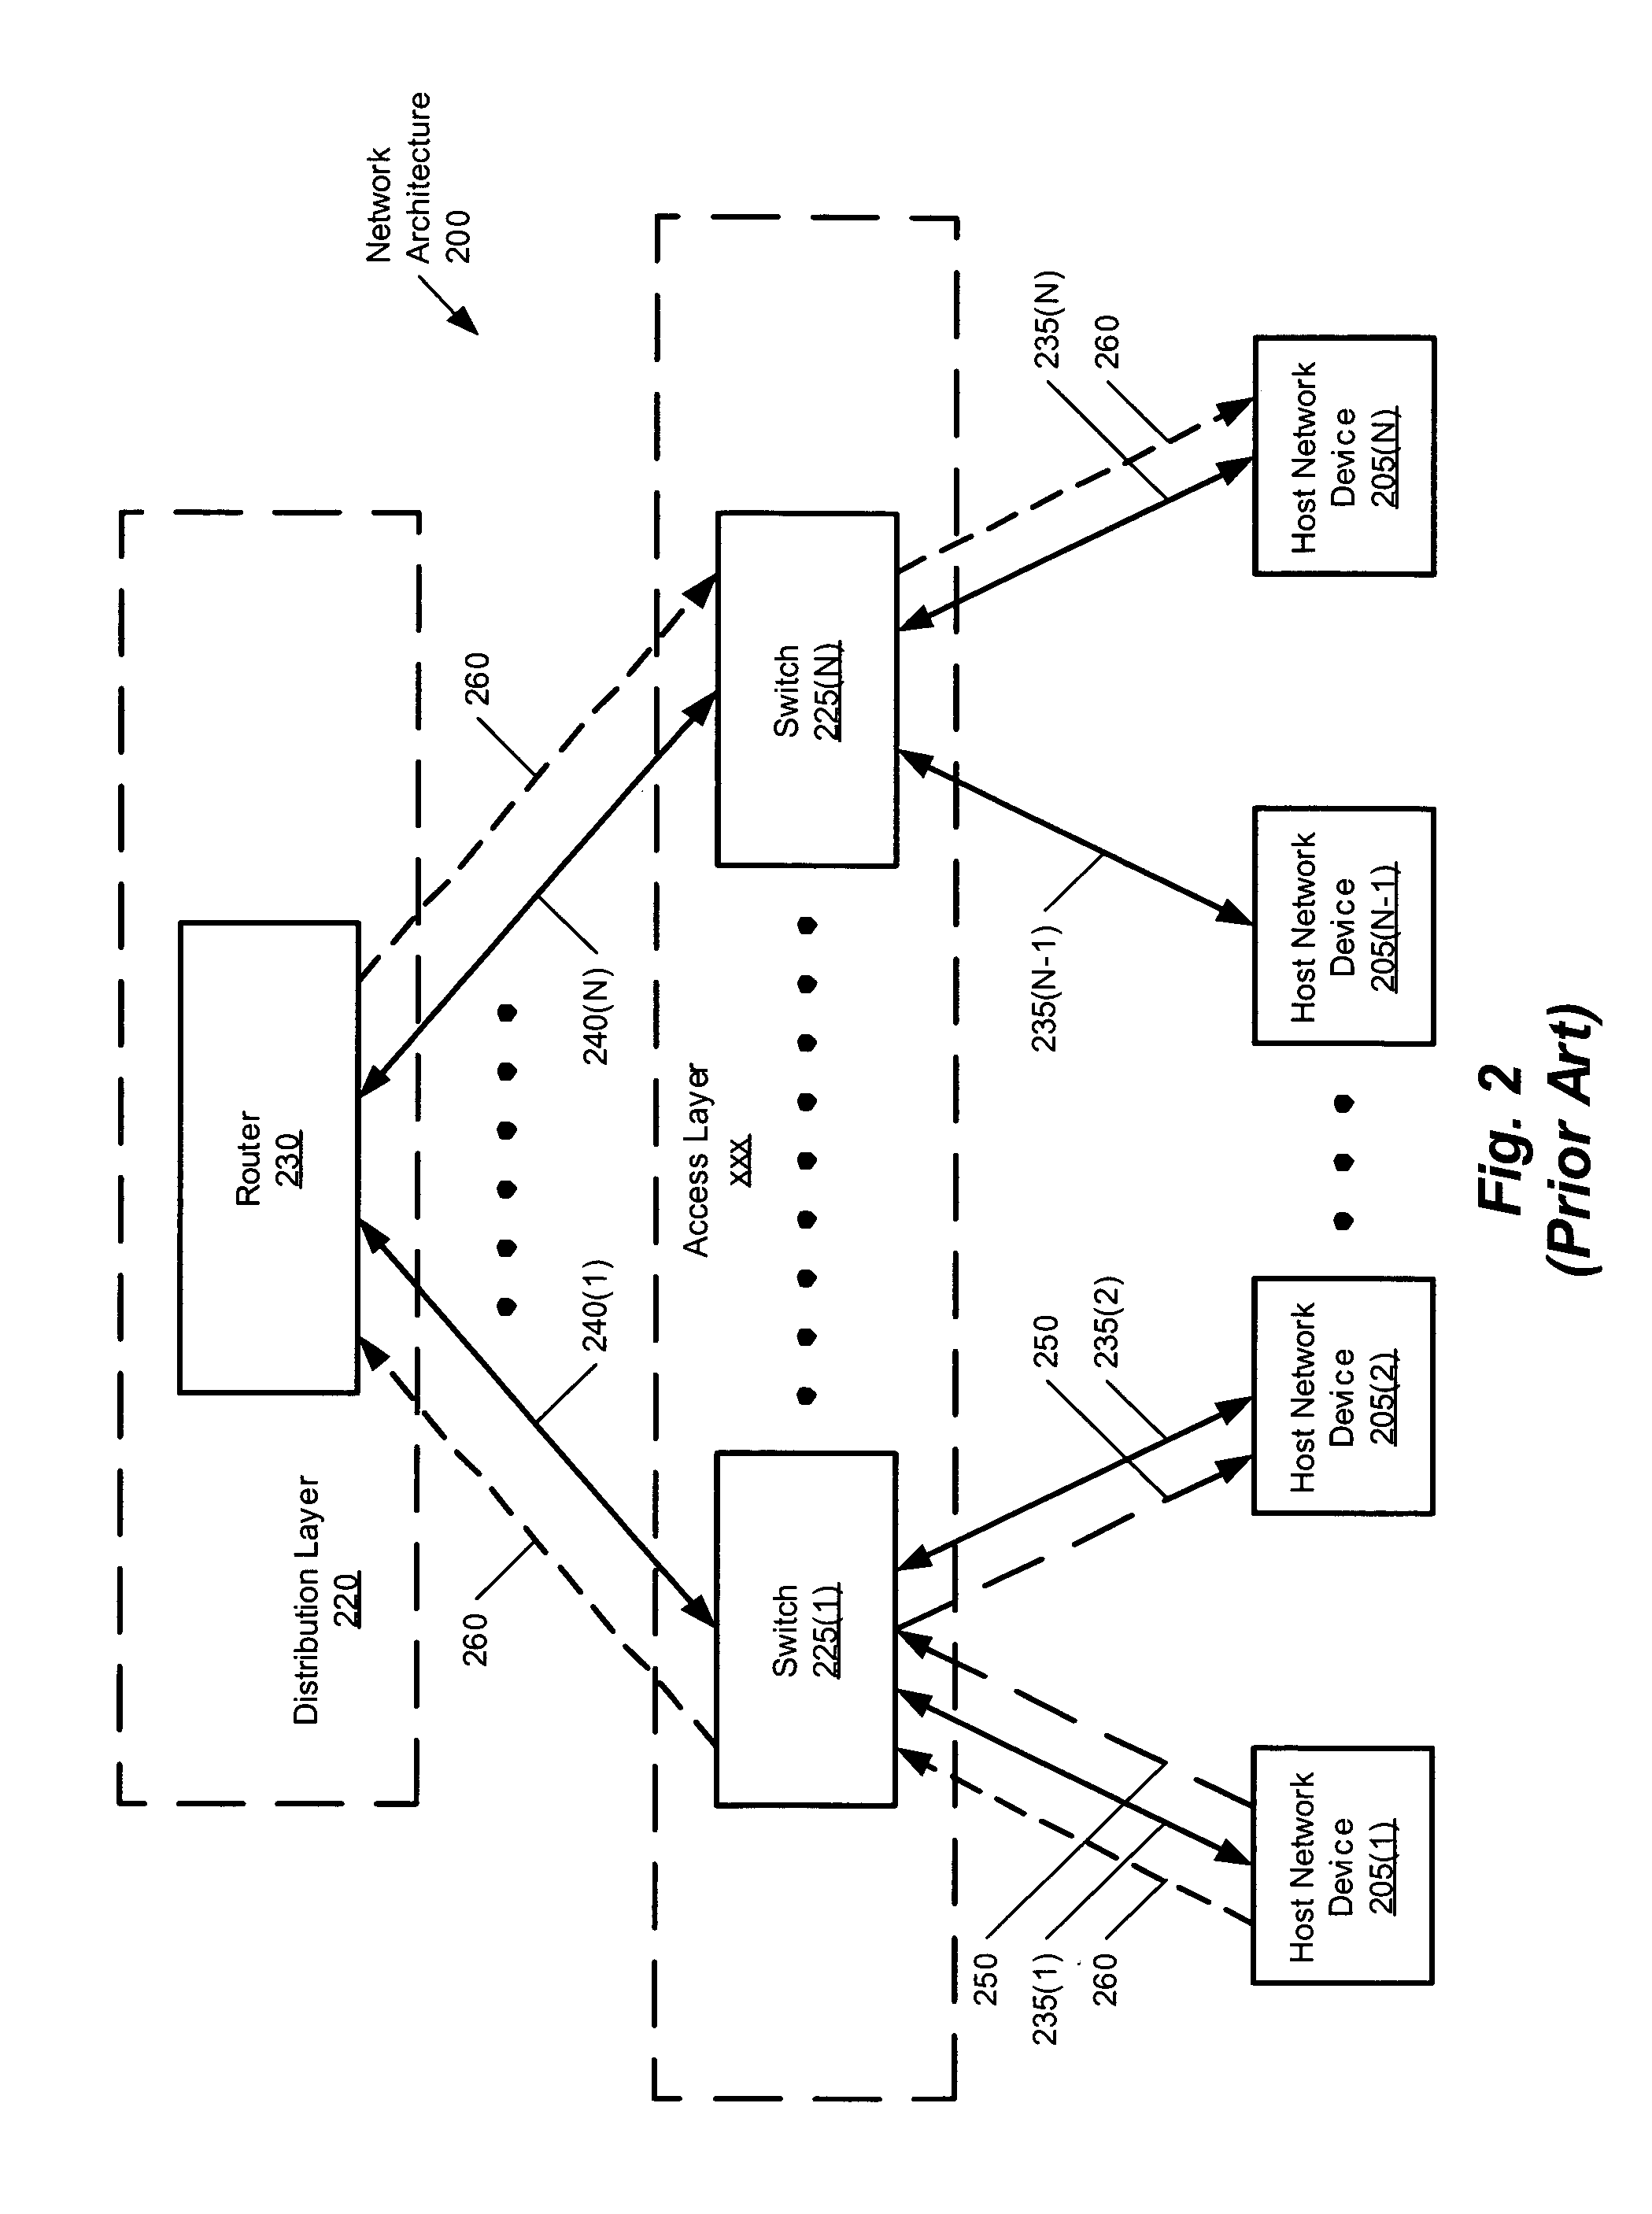 Network device architecture for centralized packet processing